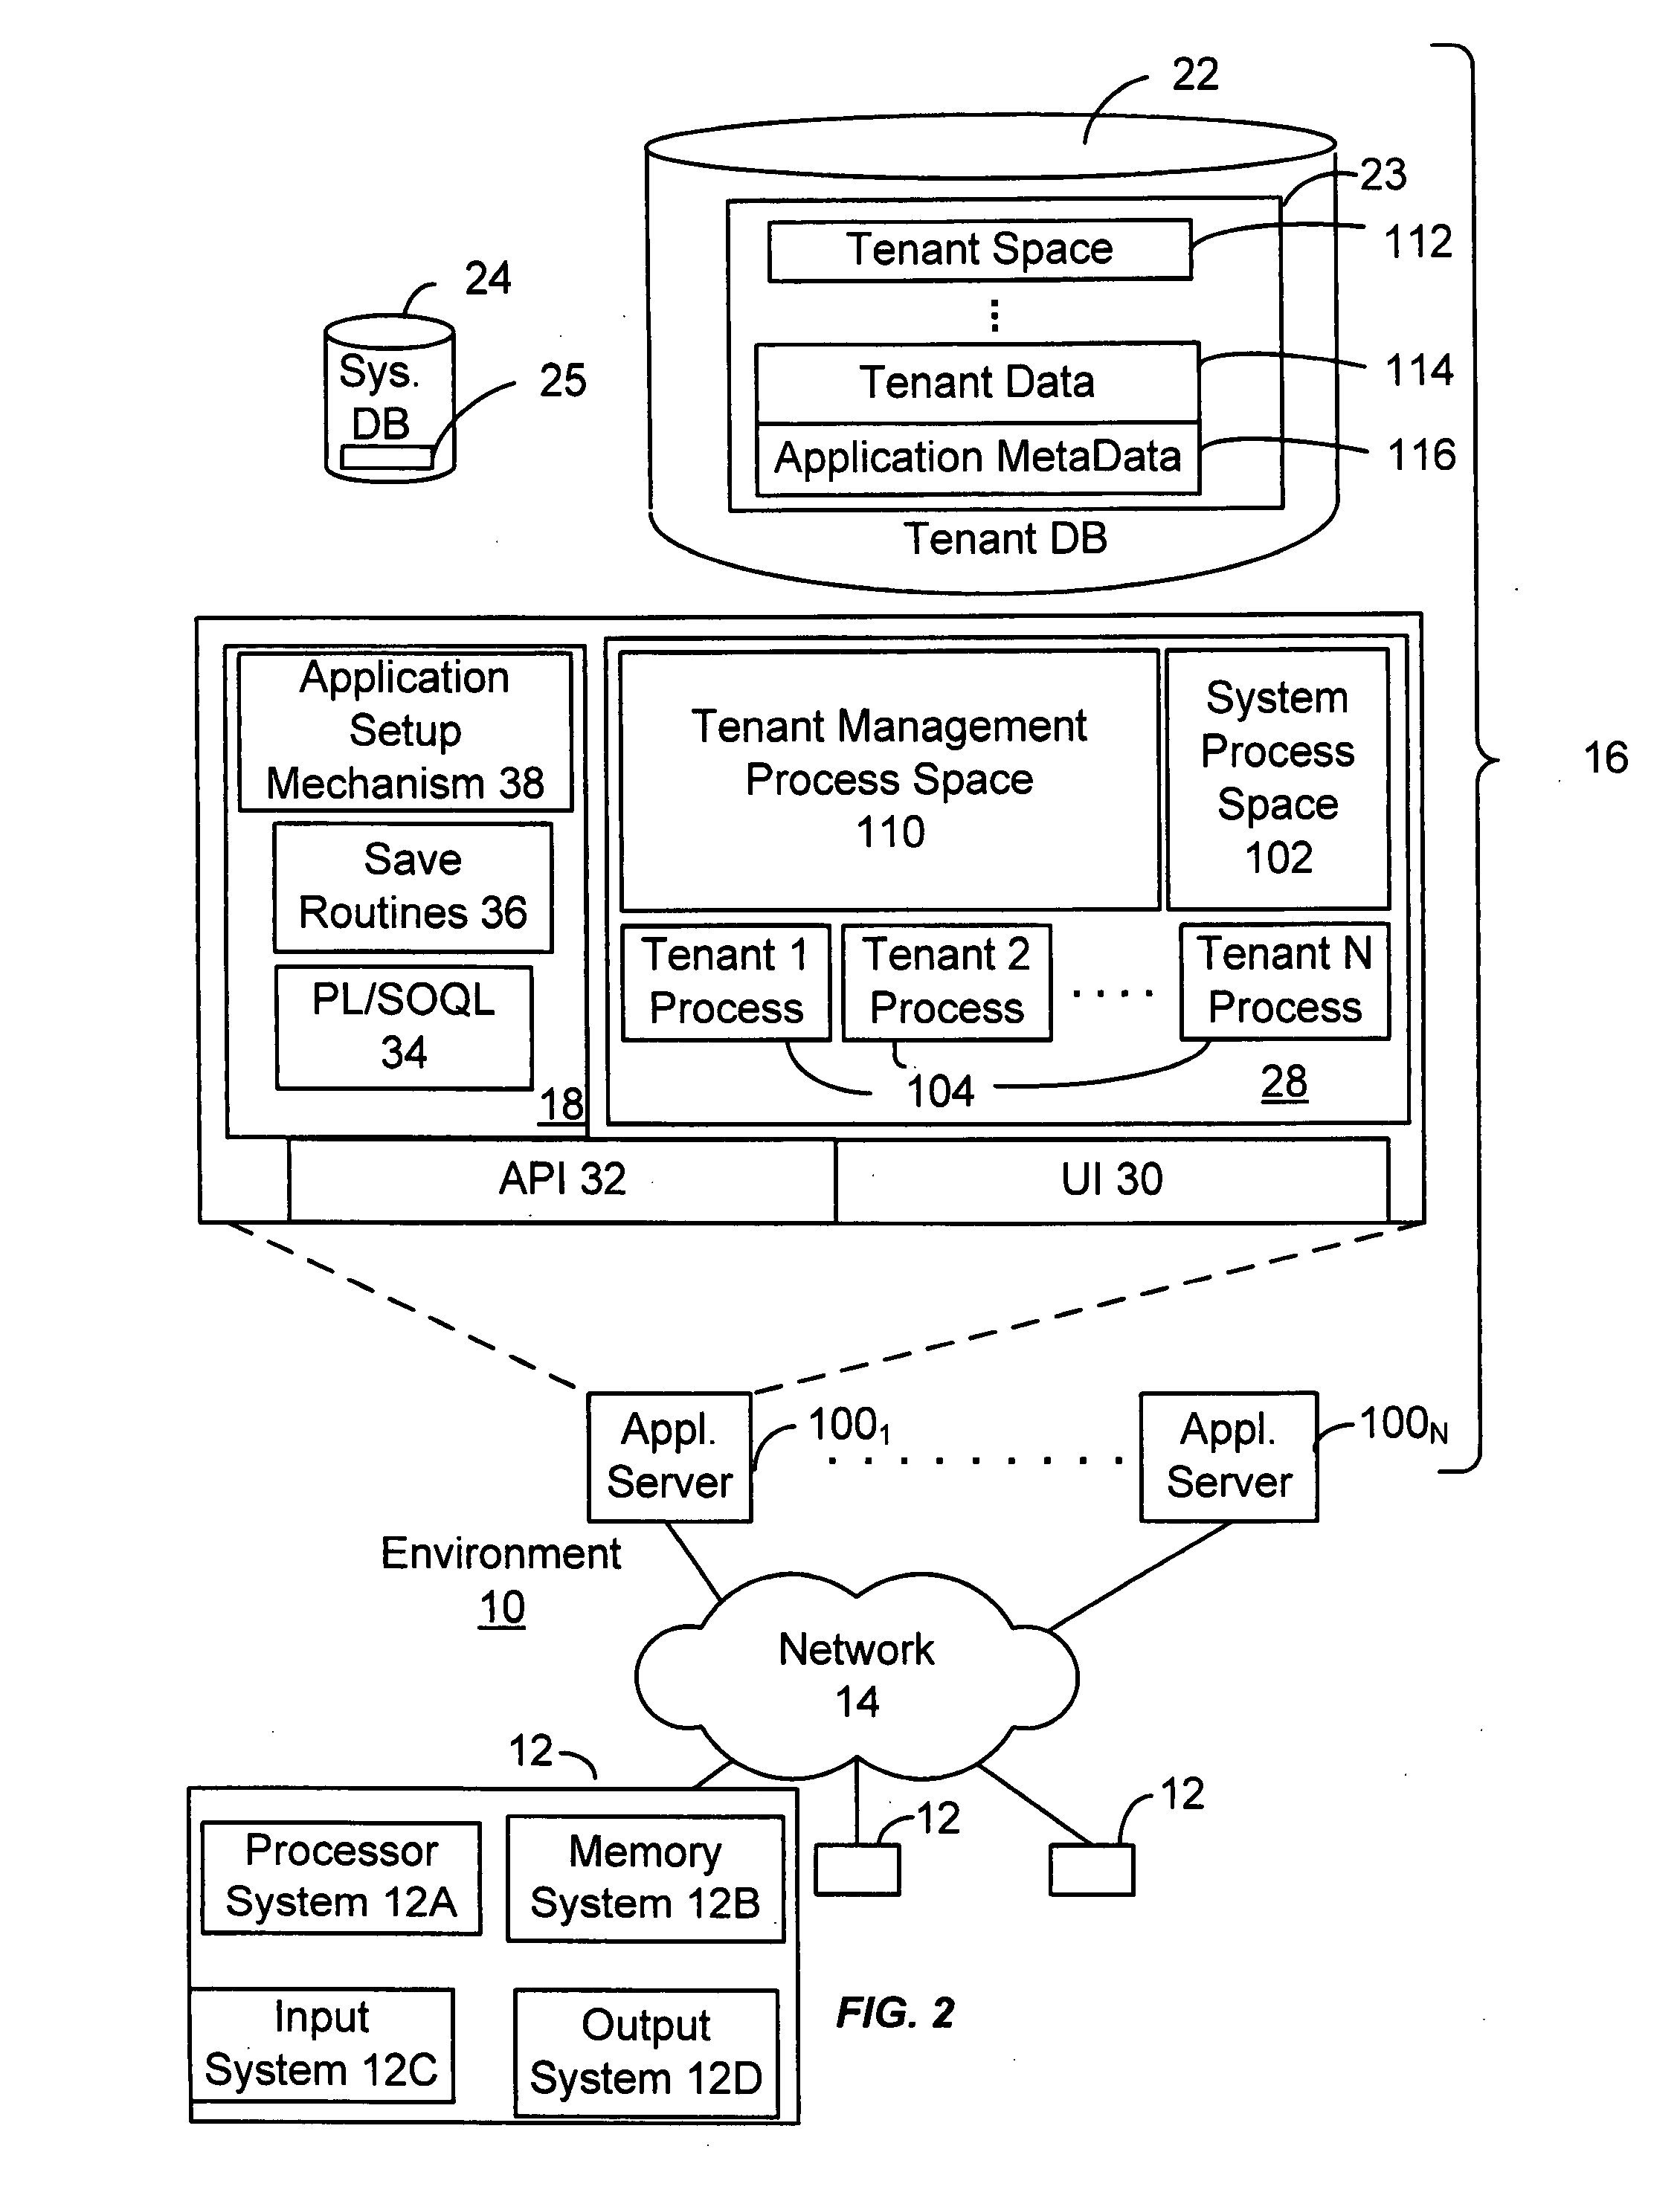 System and method for storing documents accessed by multiple users in an on-demand service